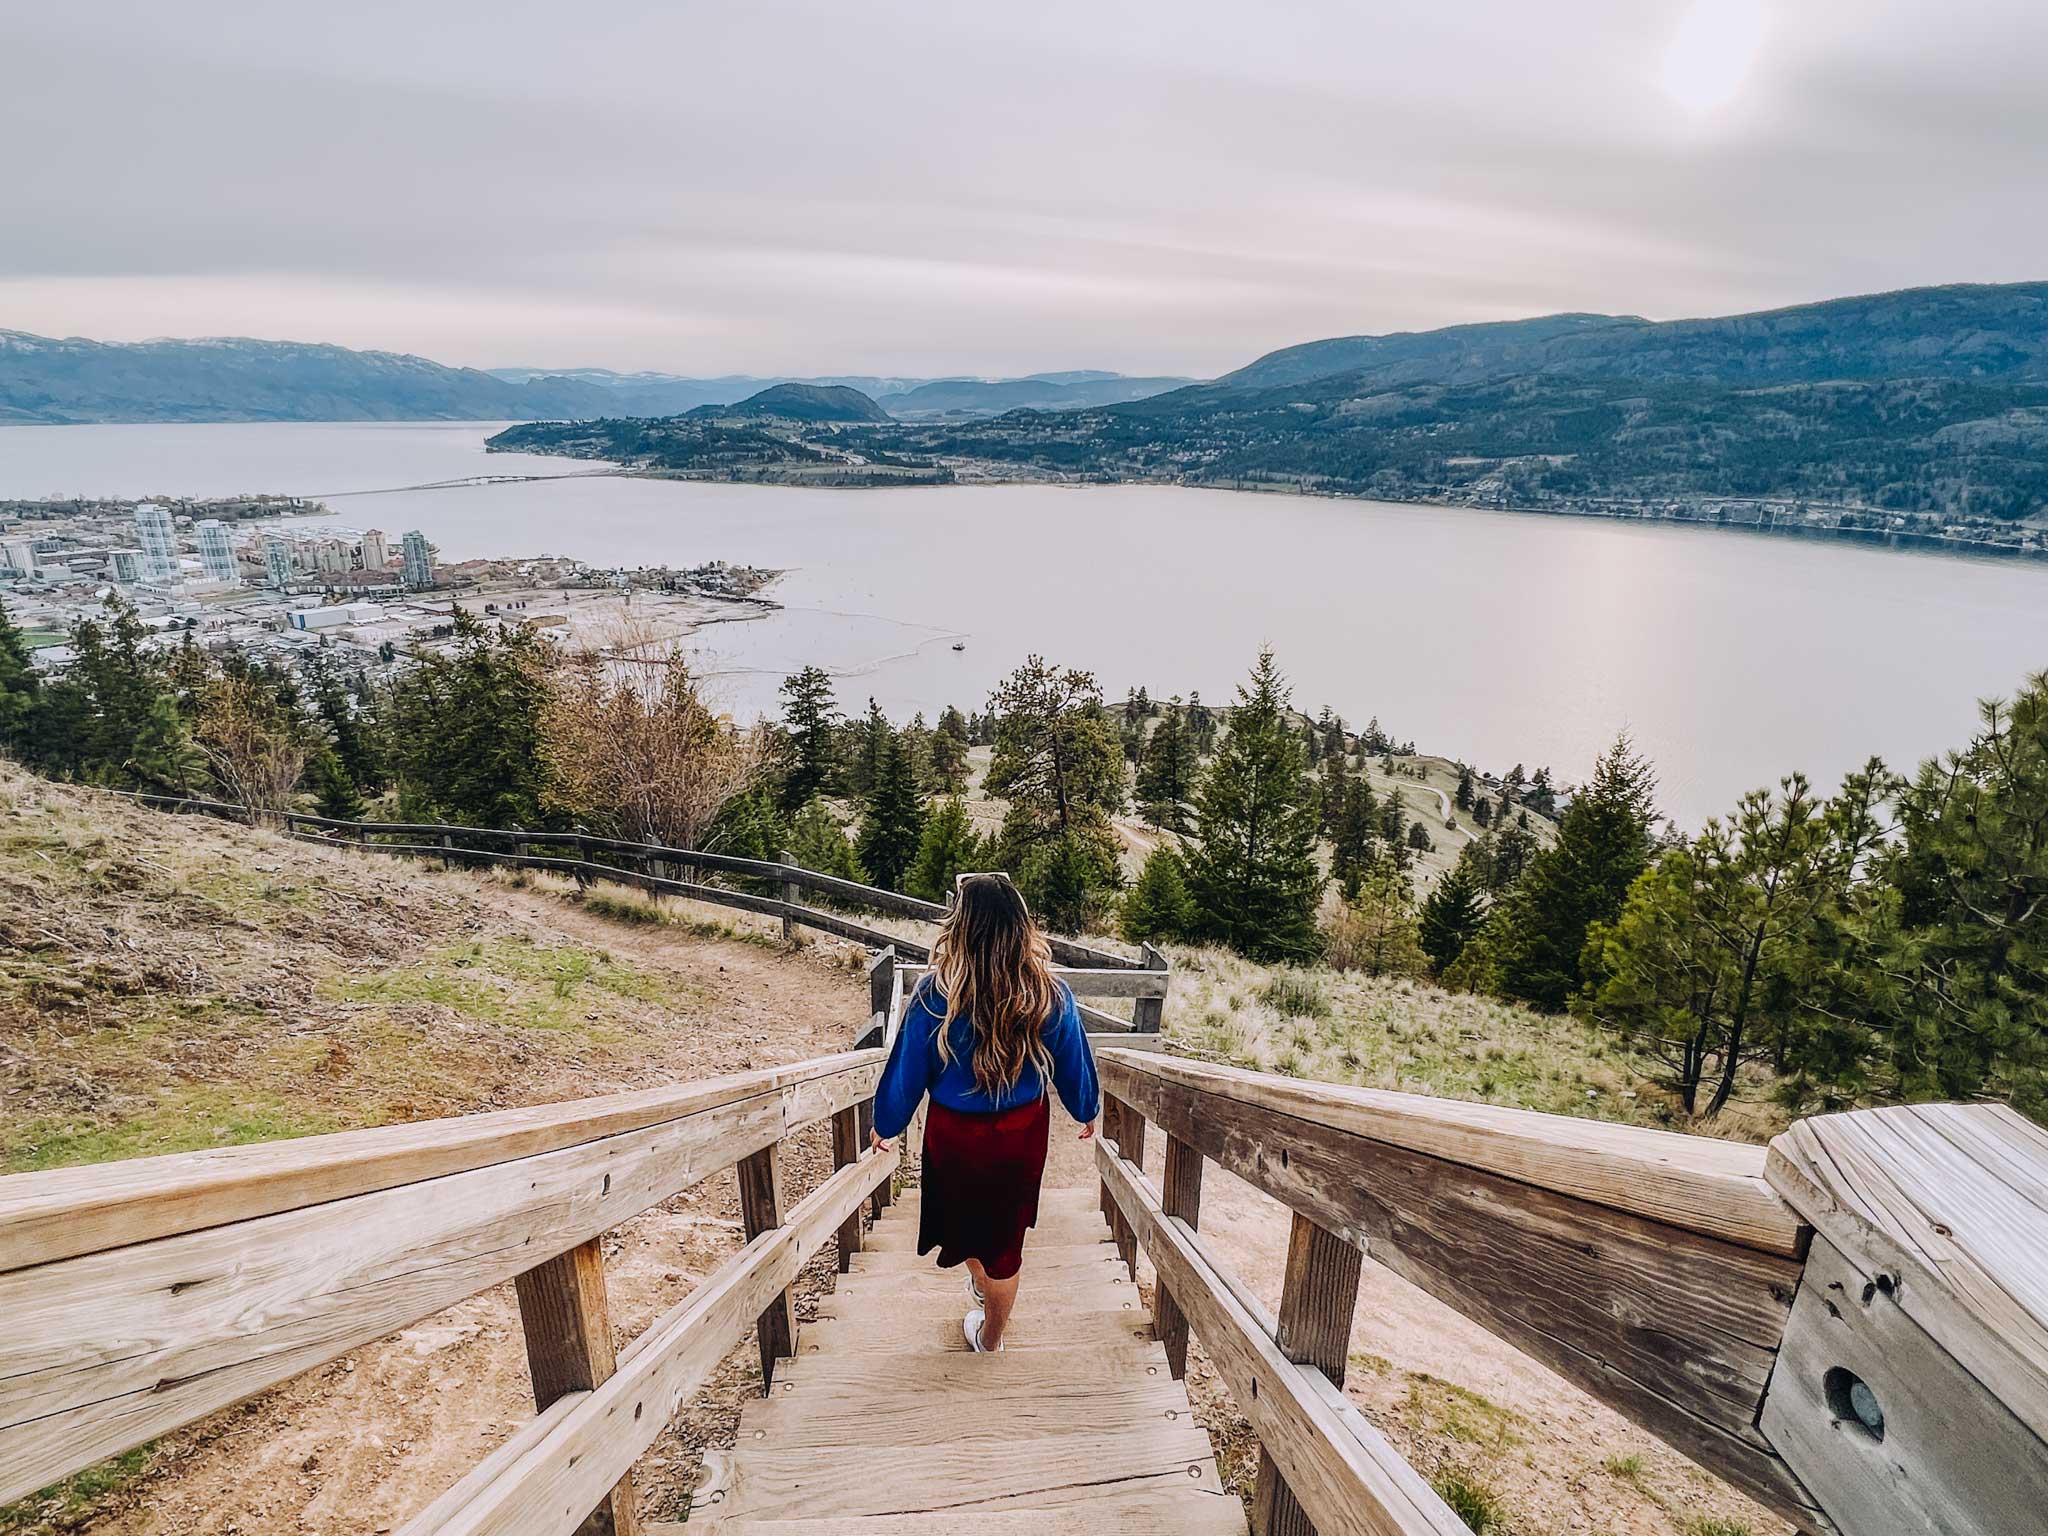 Emma Choo walks down a series of wooden stairs as she walks down from Knox Mountain. The stairs overlook the lake and mountain below. Emma is wearing a blue top and and a red skirt.